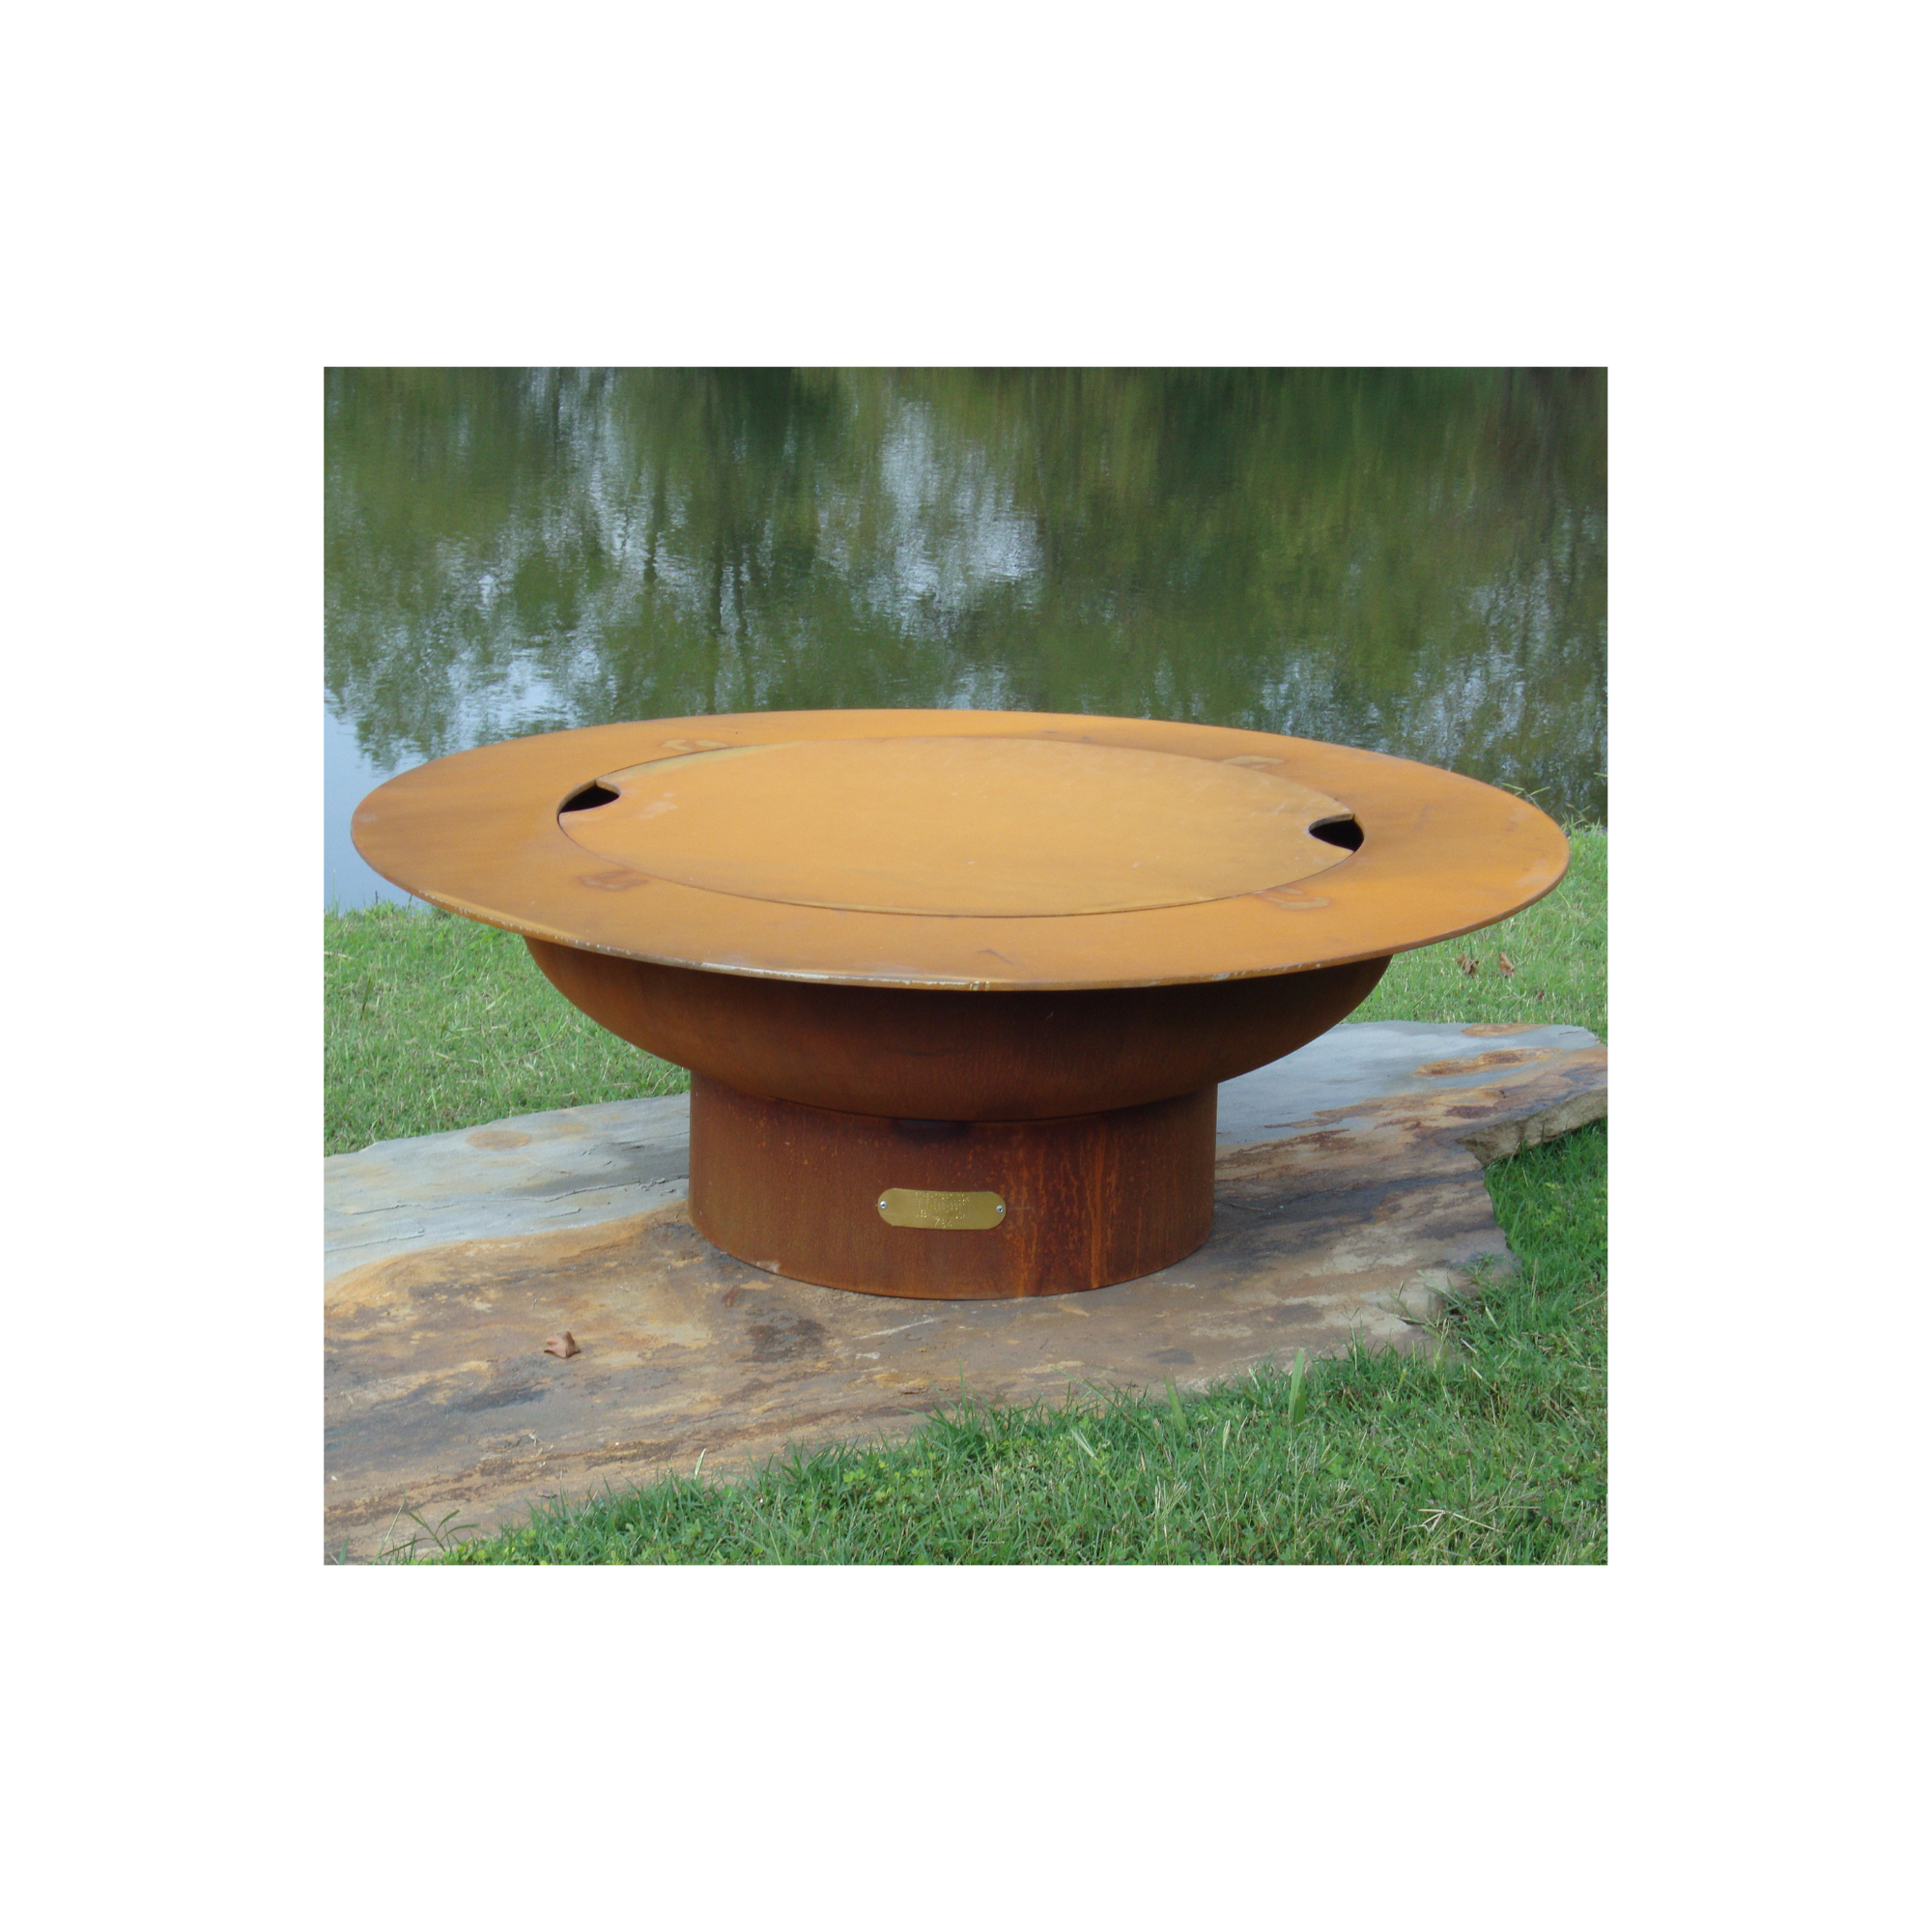 Fire Pit Art Saturn with lid